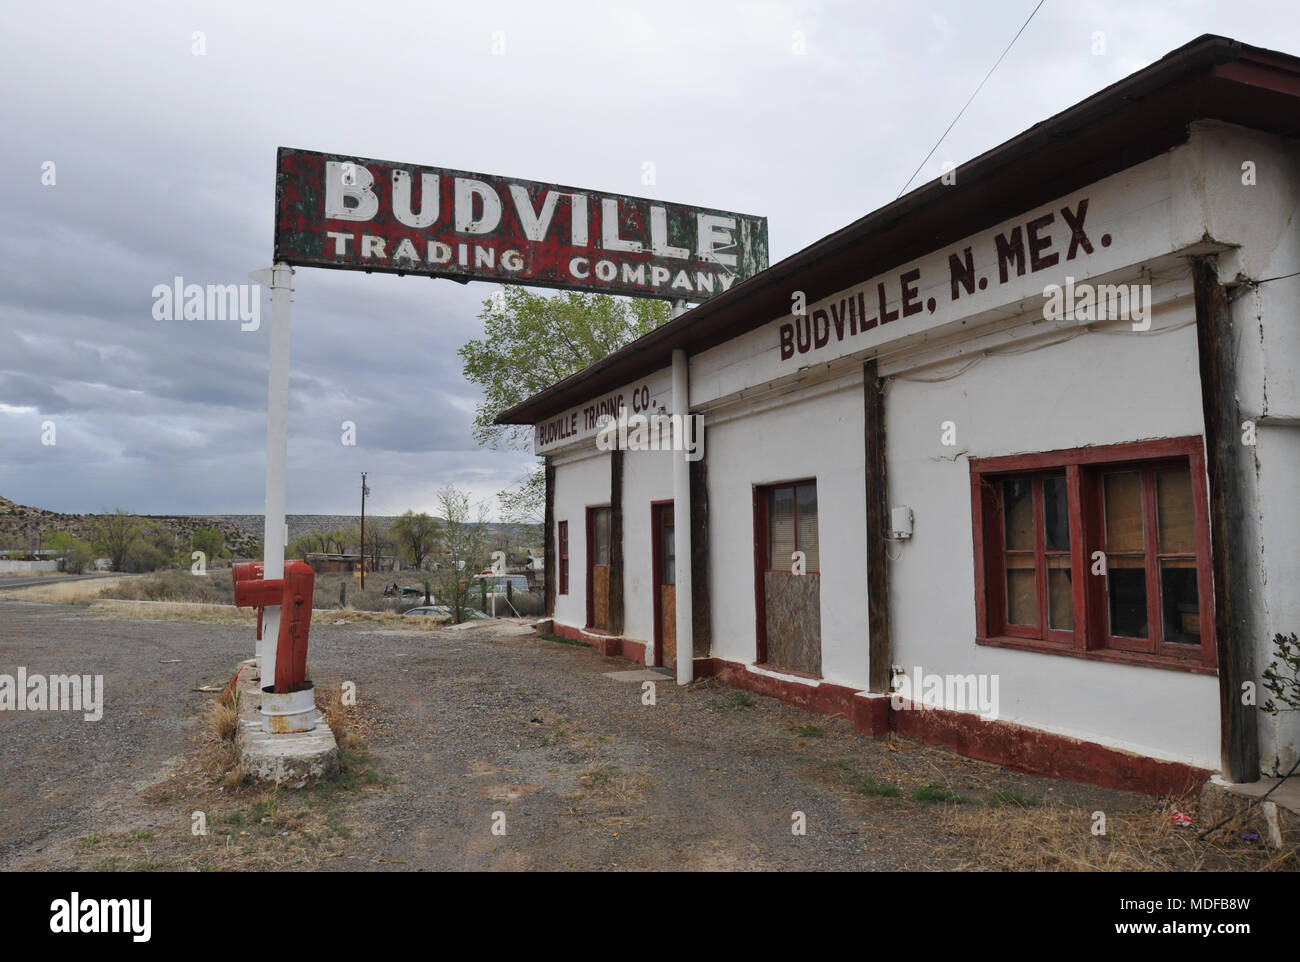 The historic Budville Trading Company in Budville, New Mexico. The long-closed business was once a popular stop for locals and motorists on Route 66. Stock Photo